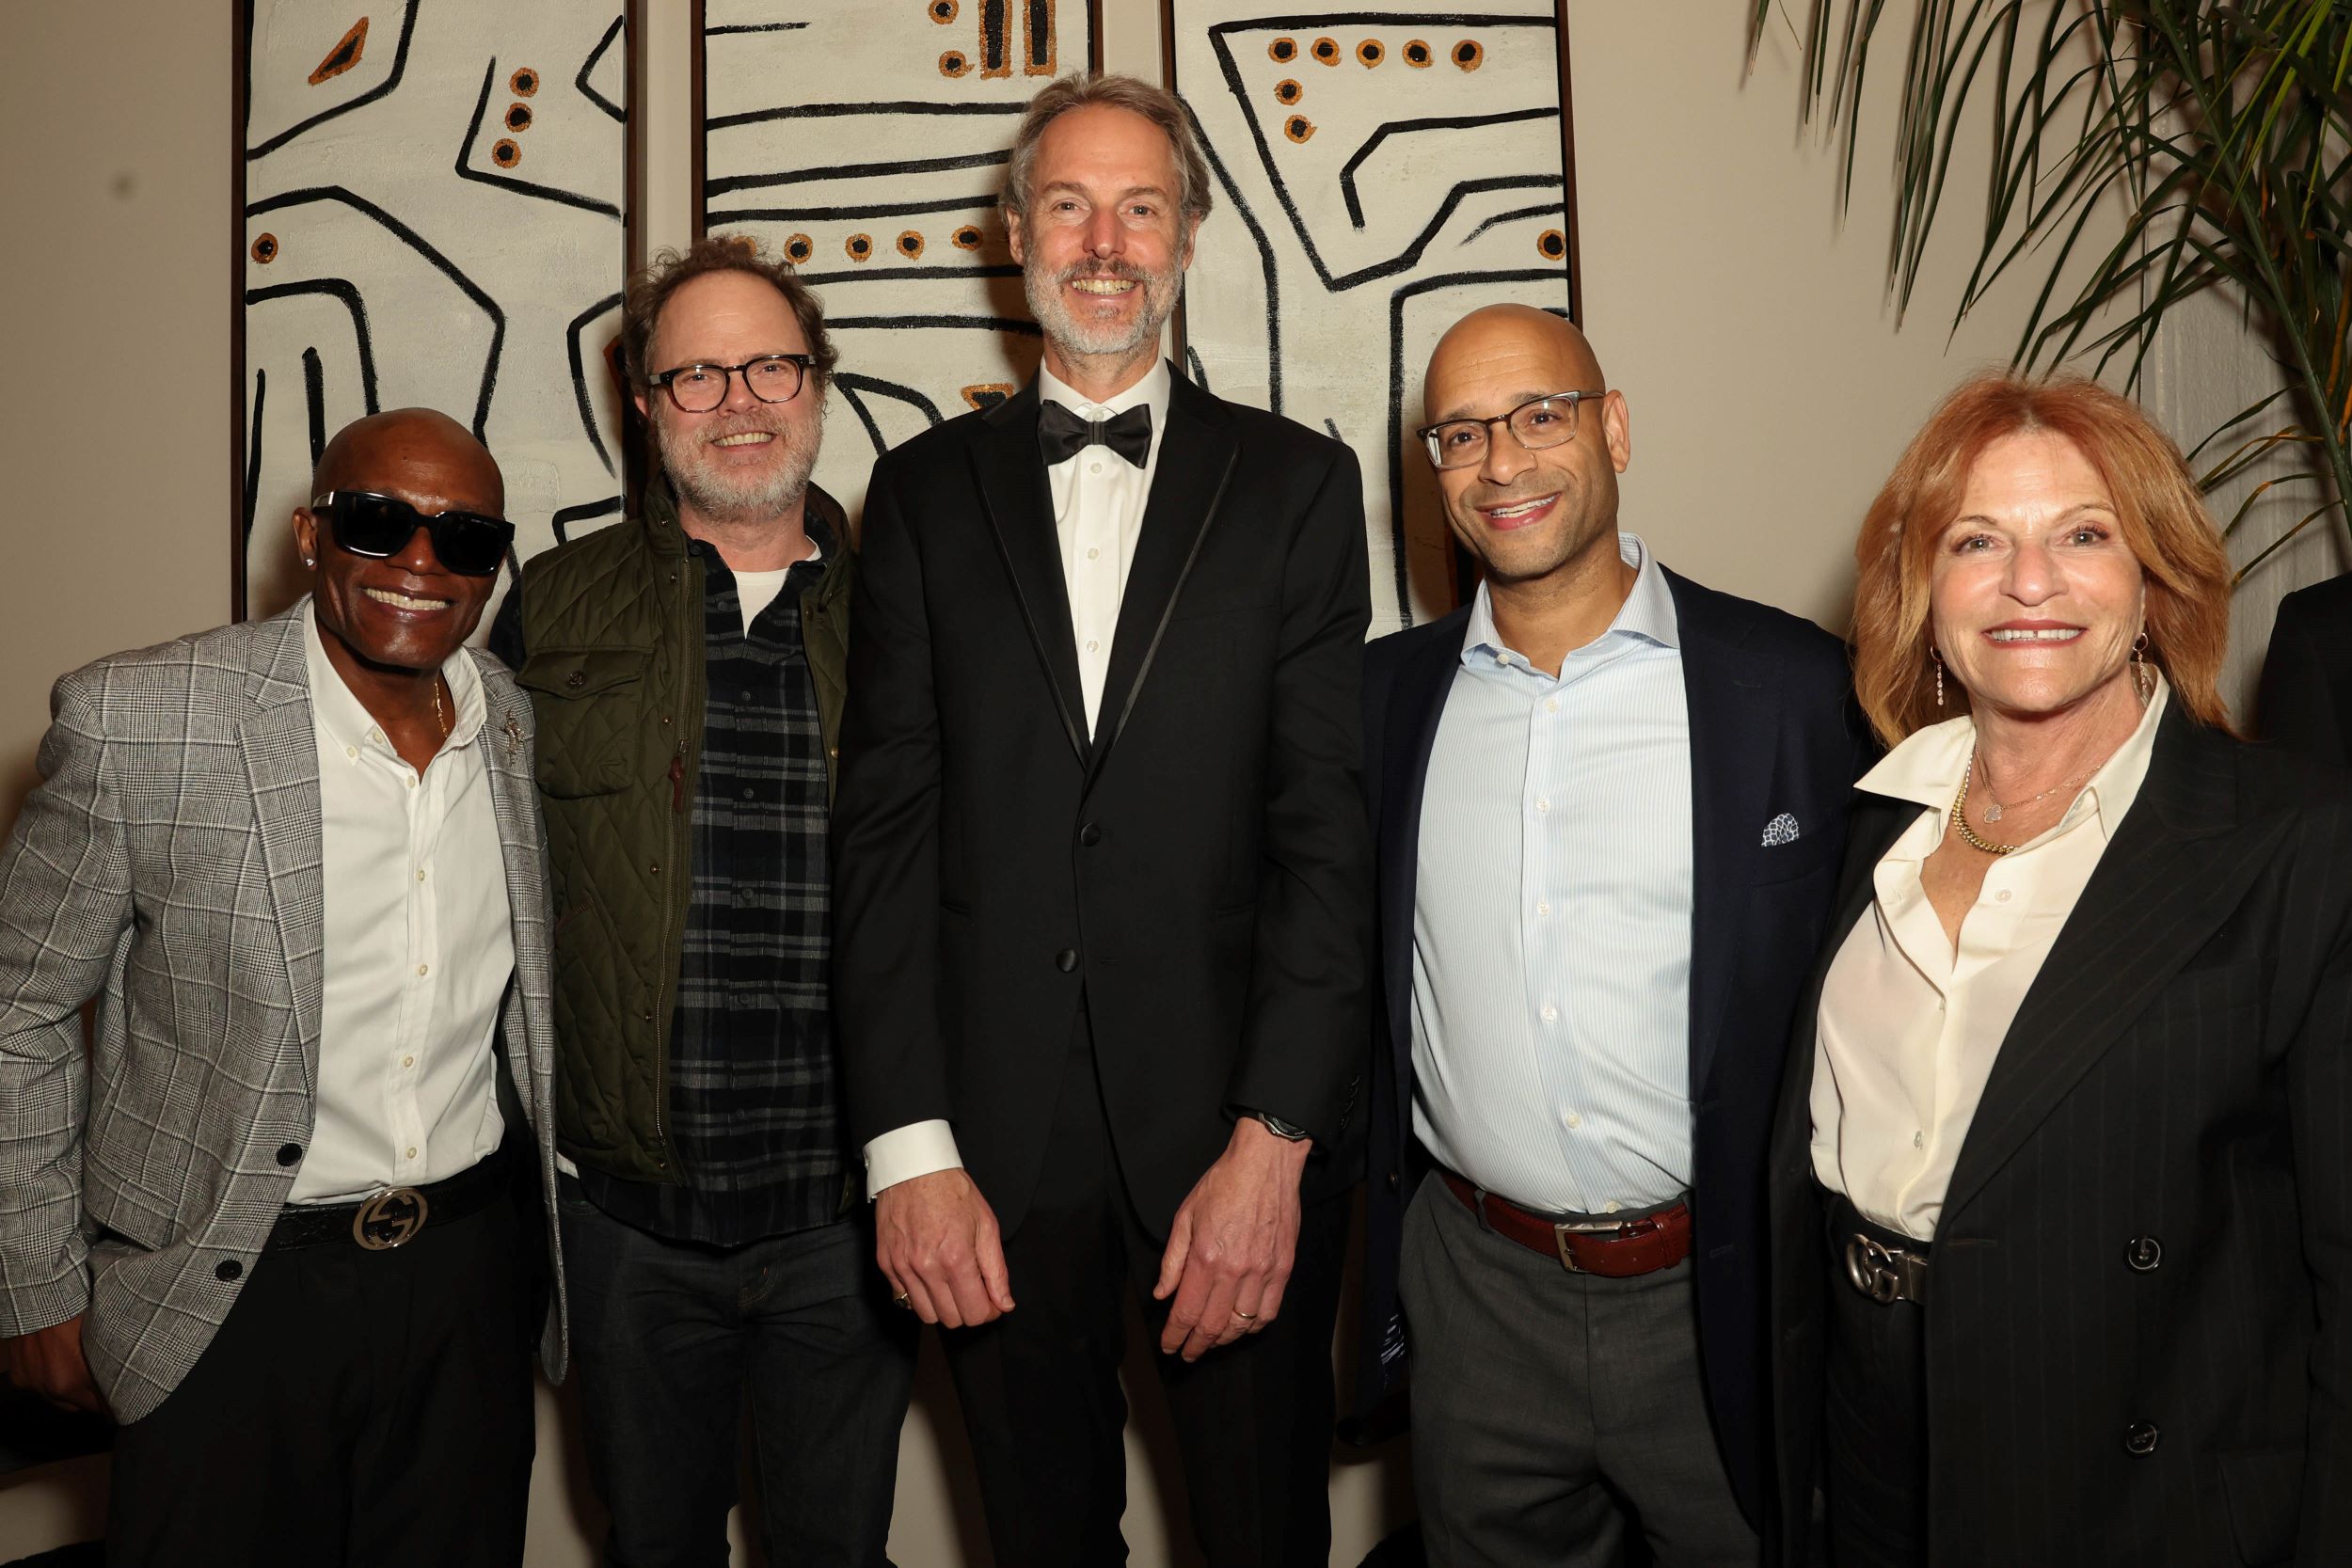 An image of James Gibson, Rainn Wilson and others at the Sofitel Los Angeles at Beverly Hills.